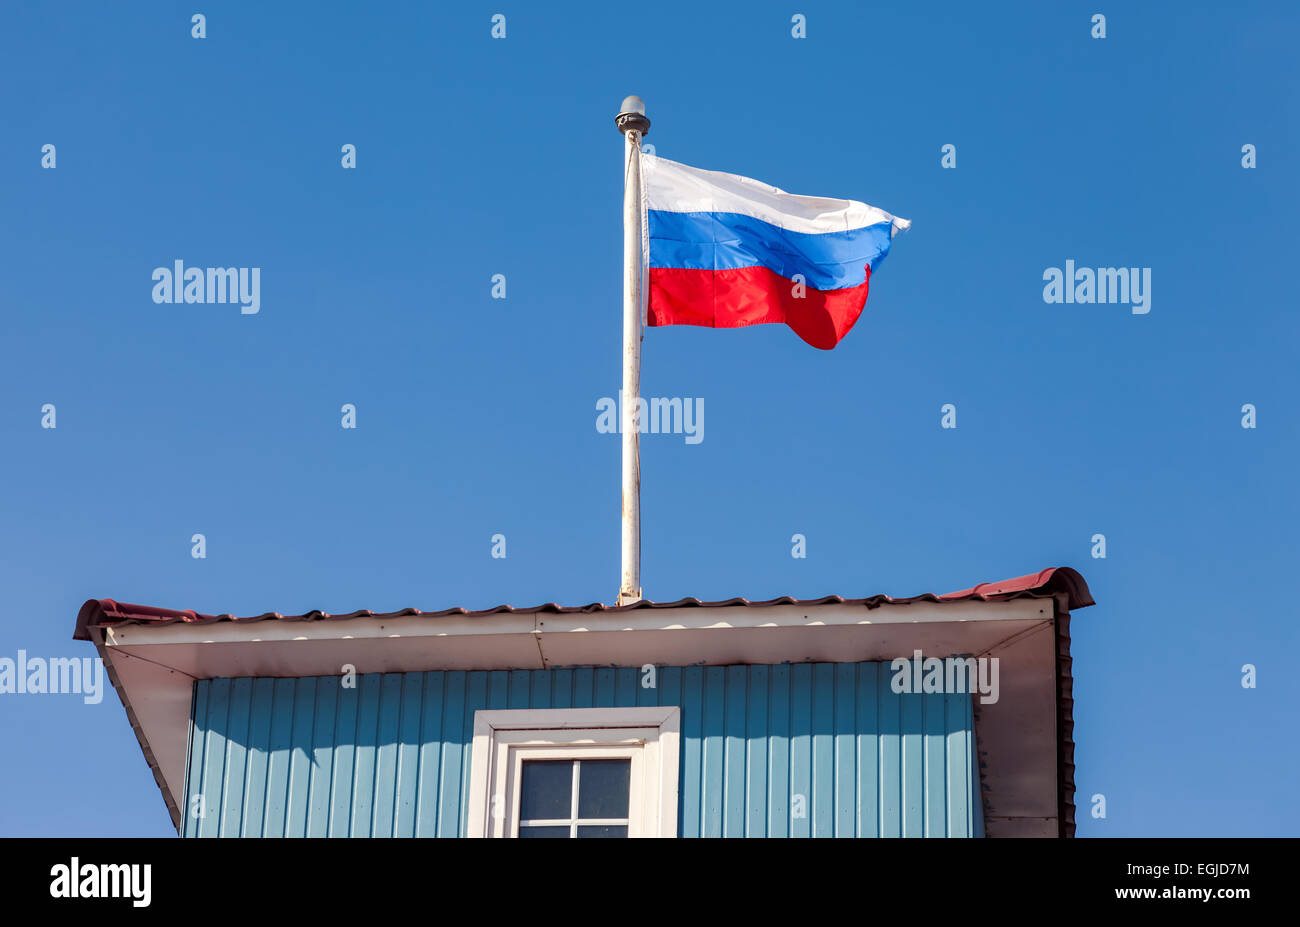 Russian flag waving in the wind over blue sky Stock Photo